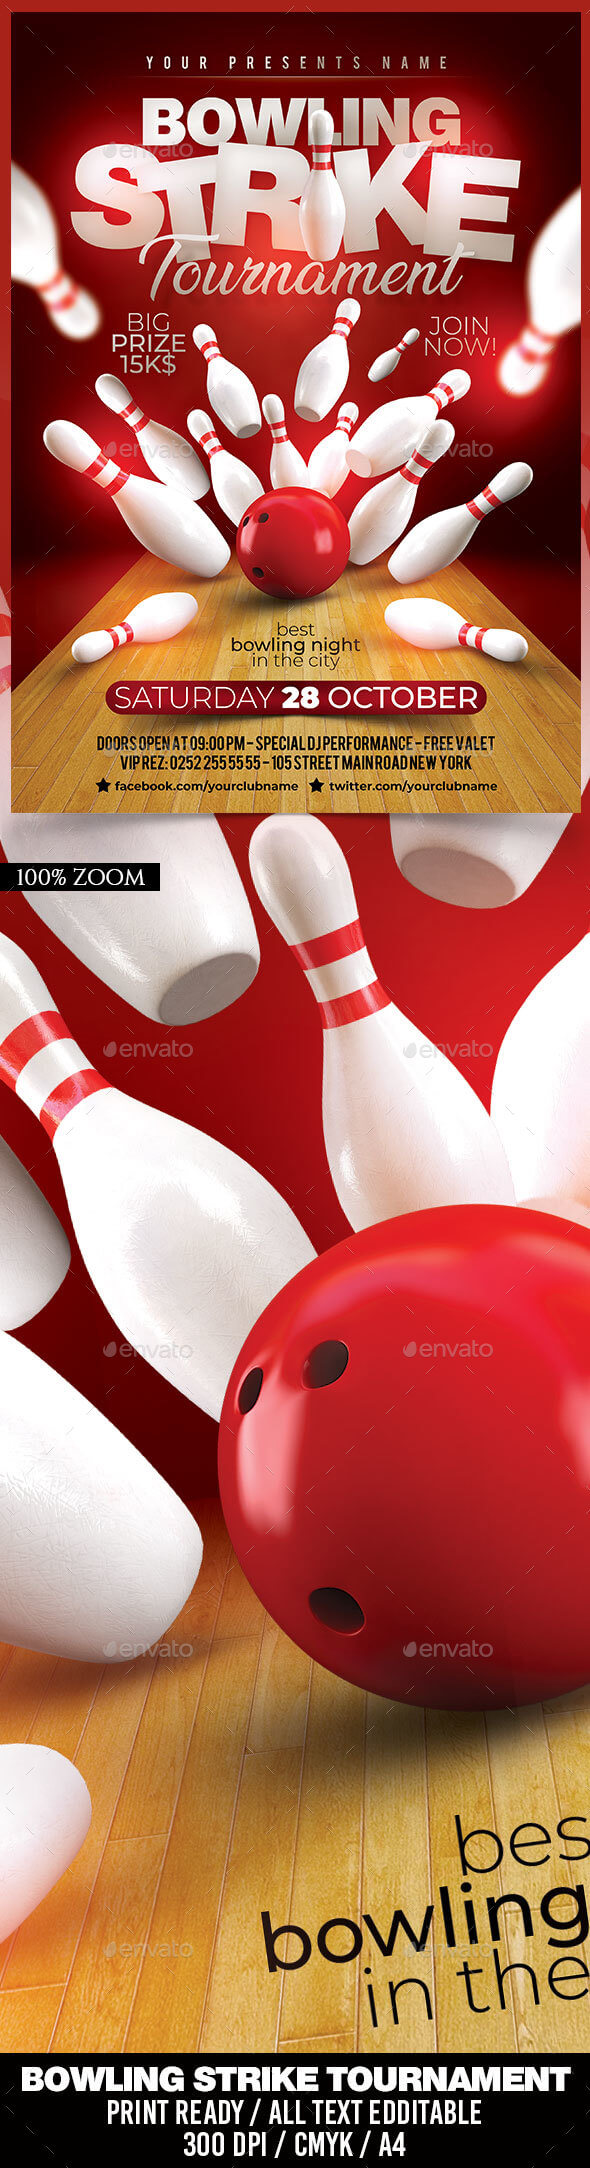 Bowling Flyer Graphics, Designs & Templates From Graphicriver Inside Bowling Flyers Templates Free